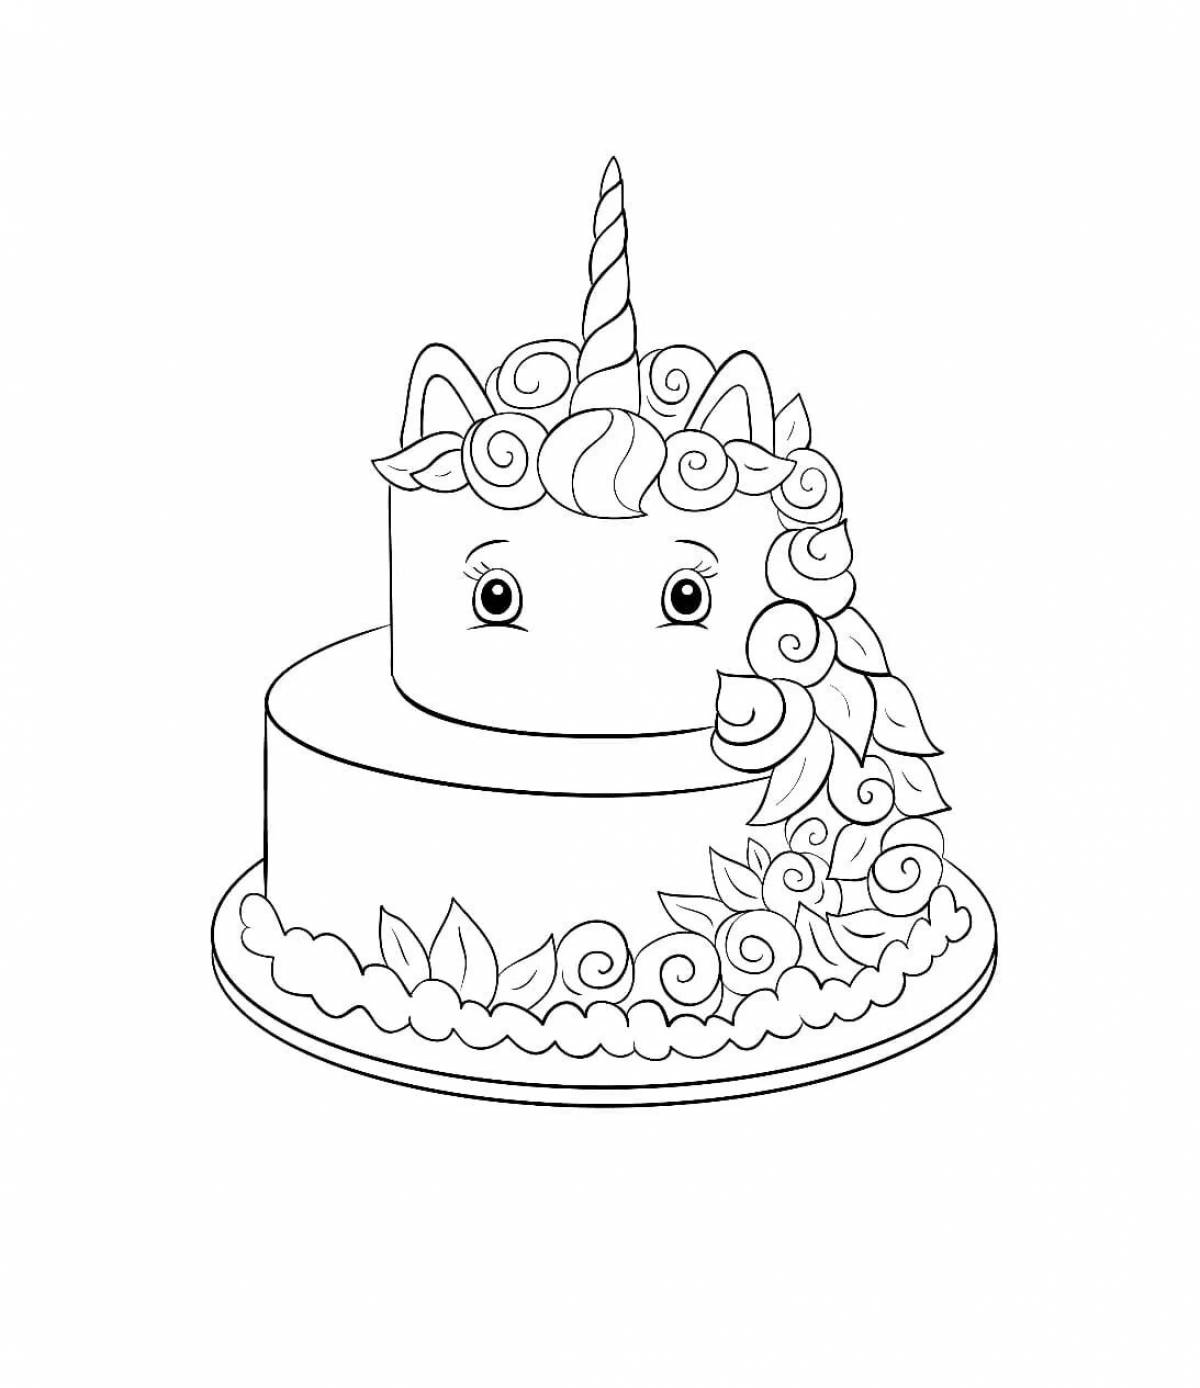 Incredibly beautiful cake coloring page